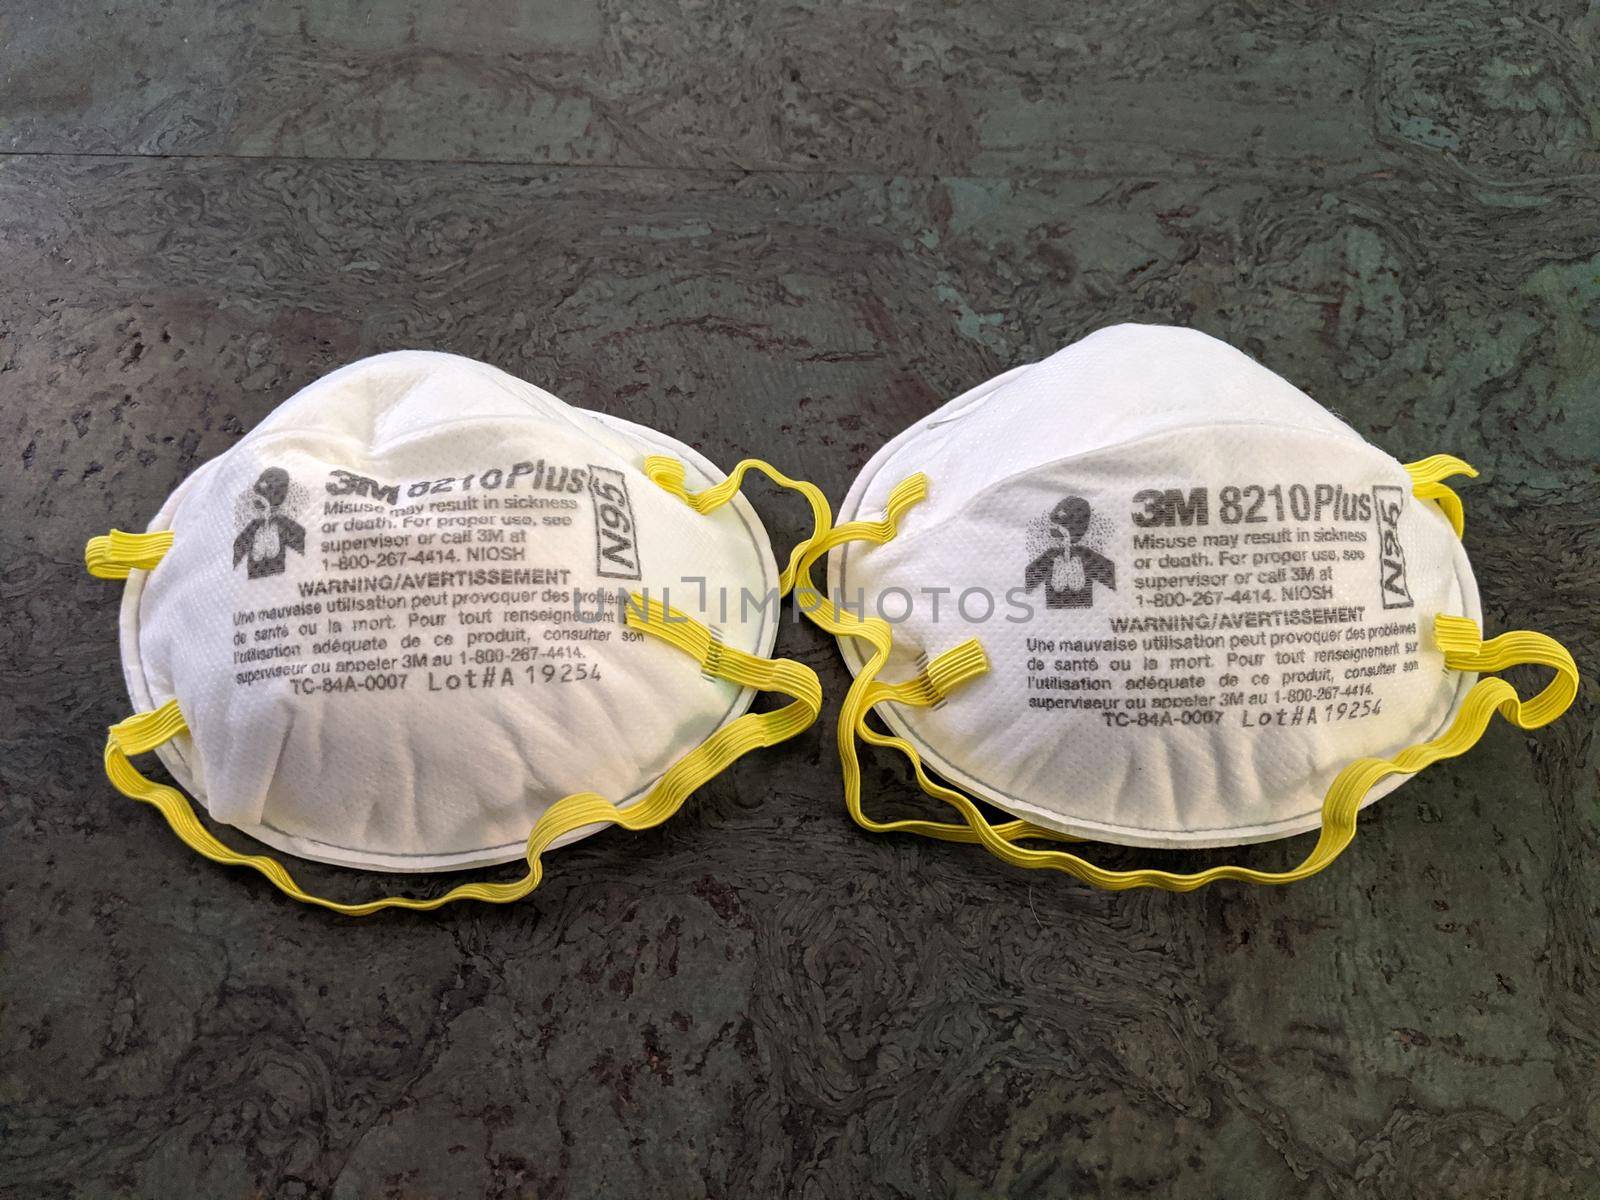 Two White N95 Face Masks with yellow ear strapsq by EricGBVD